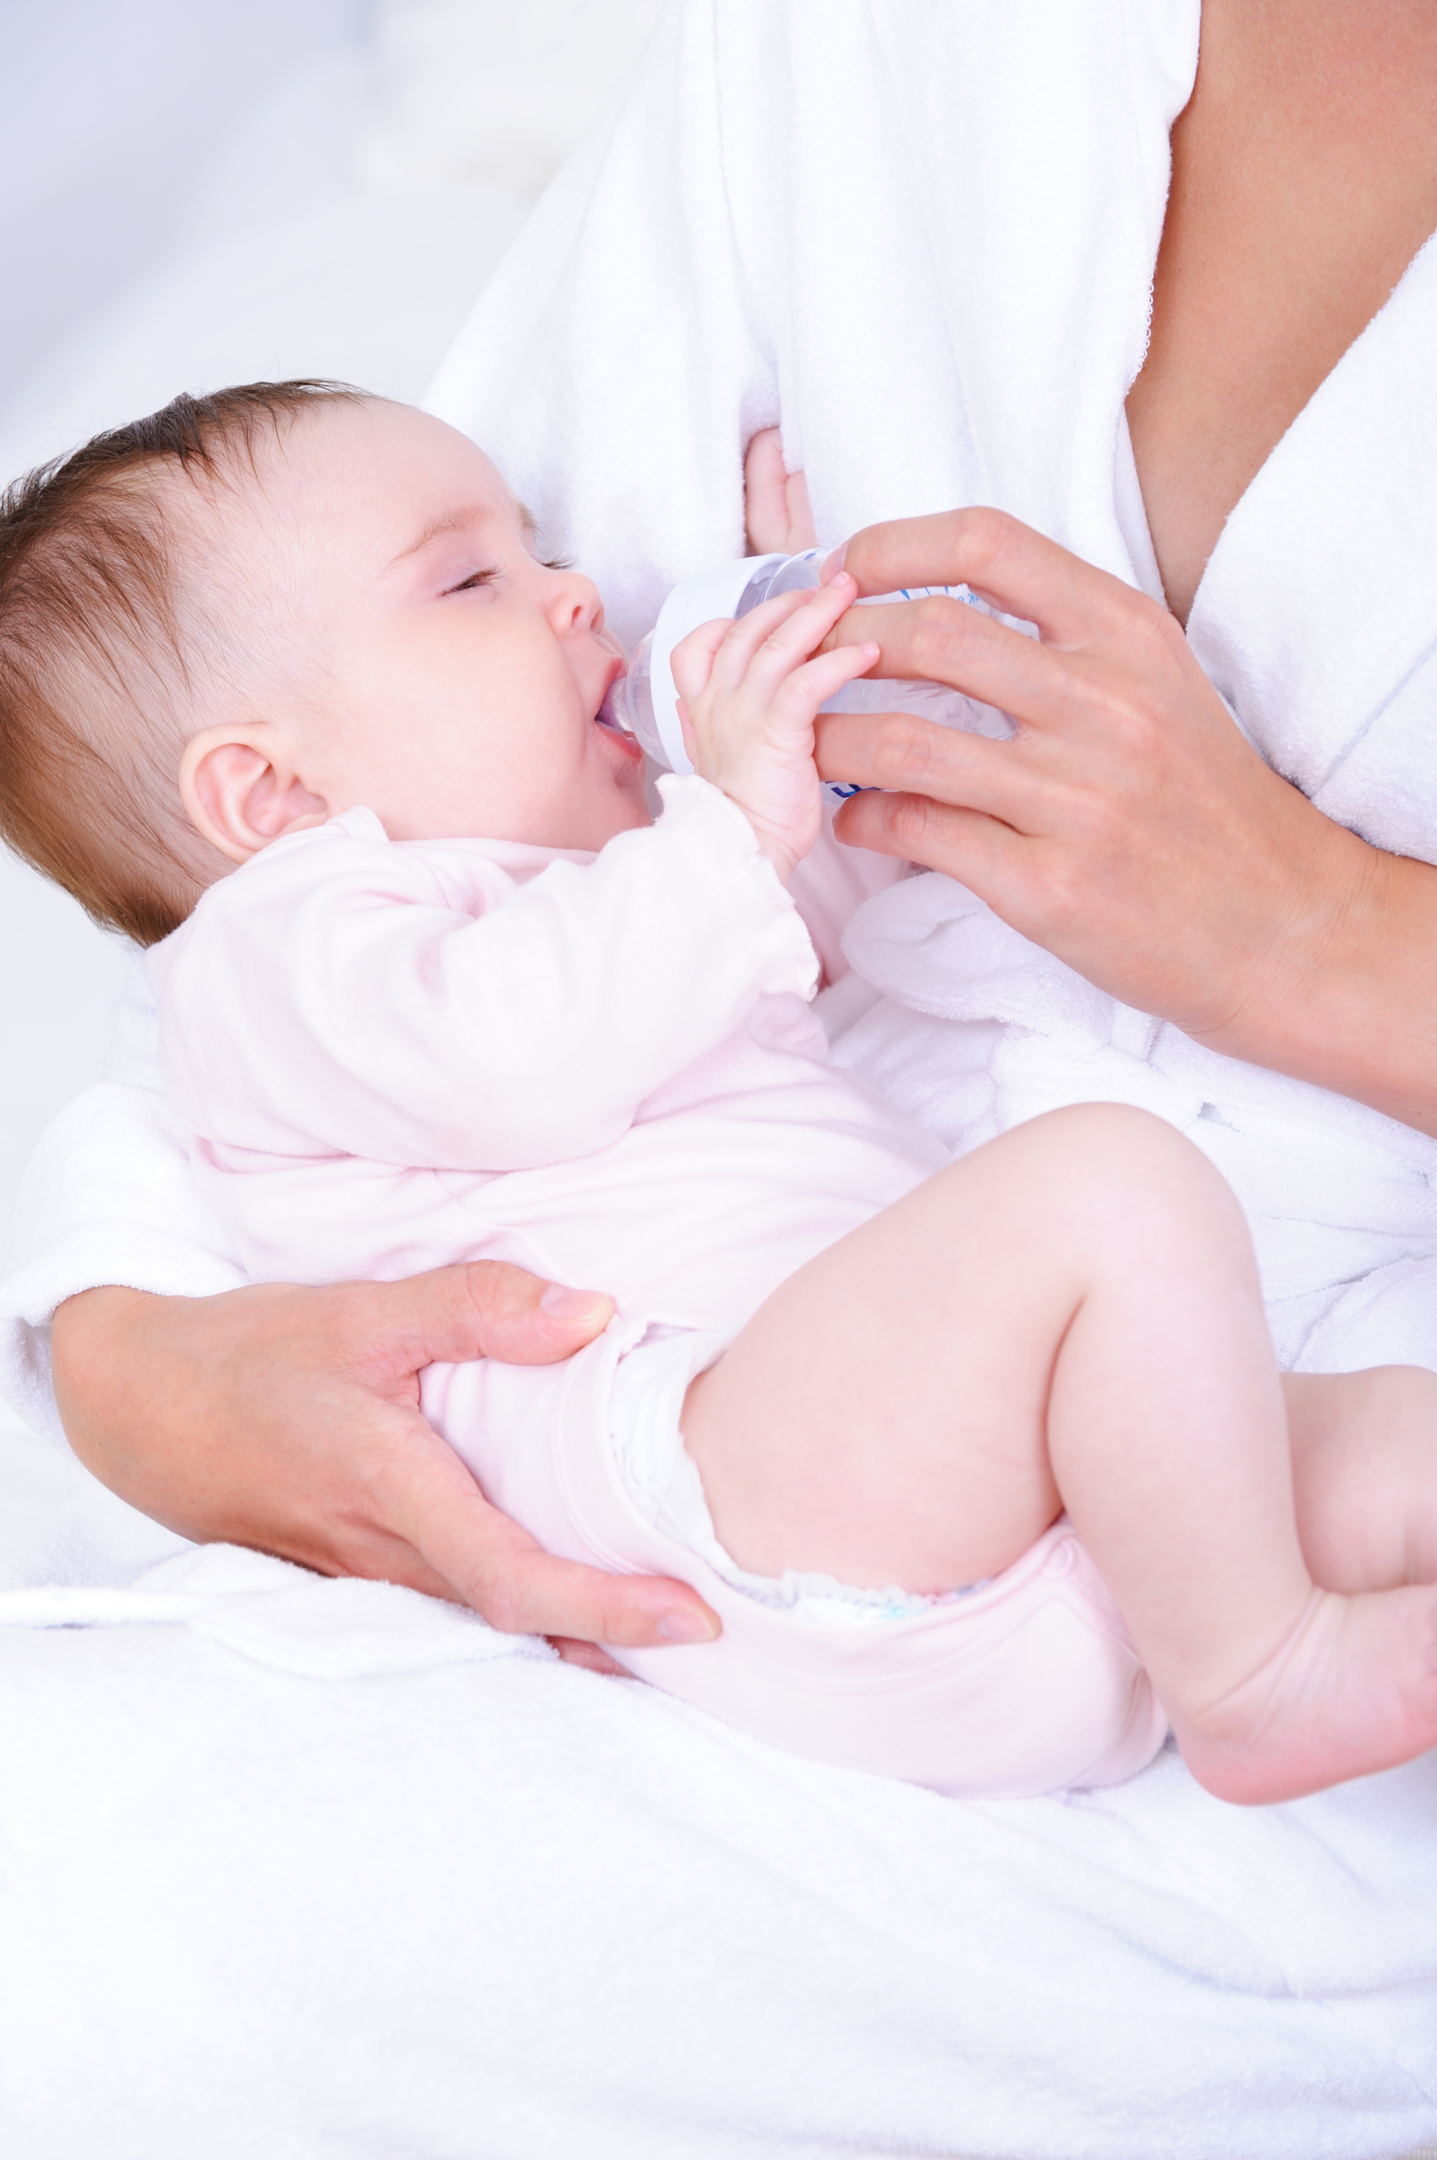 Good nursing practices reduce the risk of silent reflux.